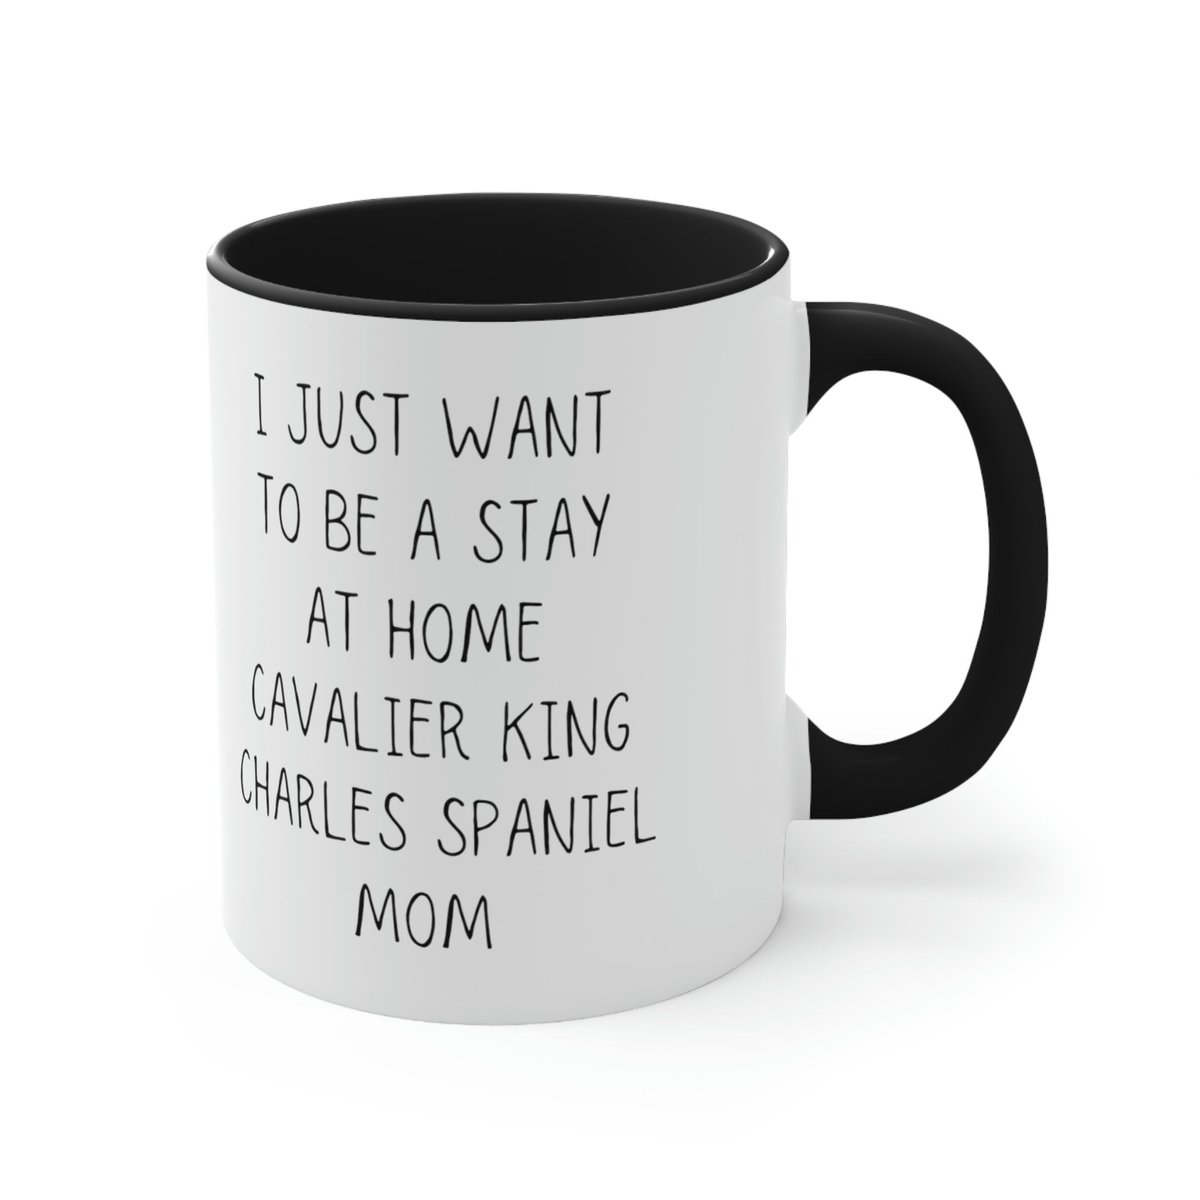 Funny Cavalier King Charles Spaniel Mom Gift Mug #cavalierking #charlesspaniel #charlesspanielgift #spanielmothersday #charlesspanielmom #cavalierkingcharlesspaniel CLICK HERE TO BUY NOW: etsy.me/41GnLjW